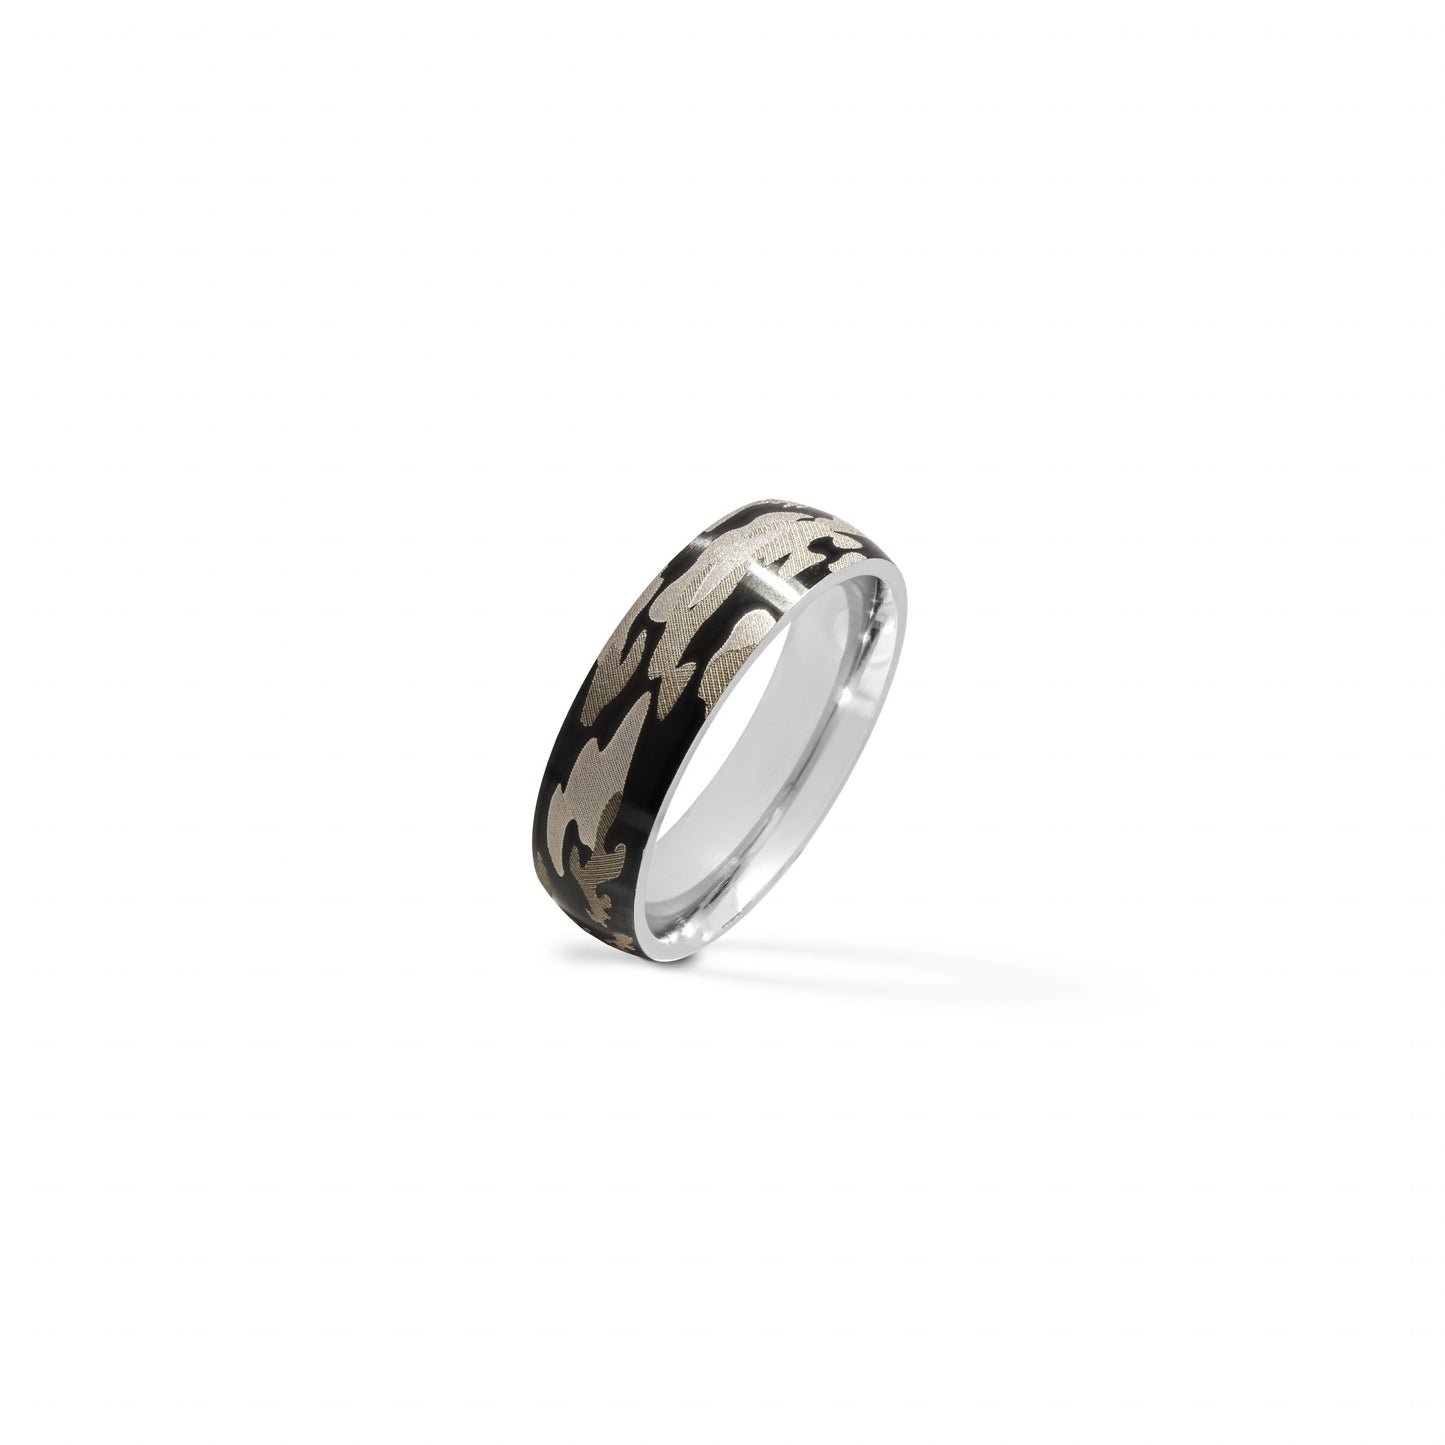 Camouflage Stainless Steel Ring